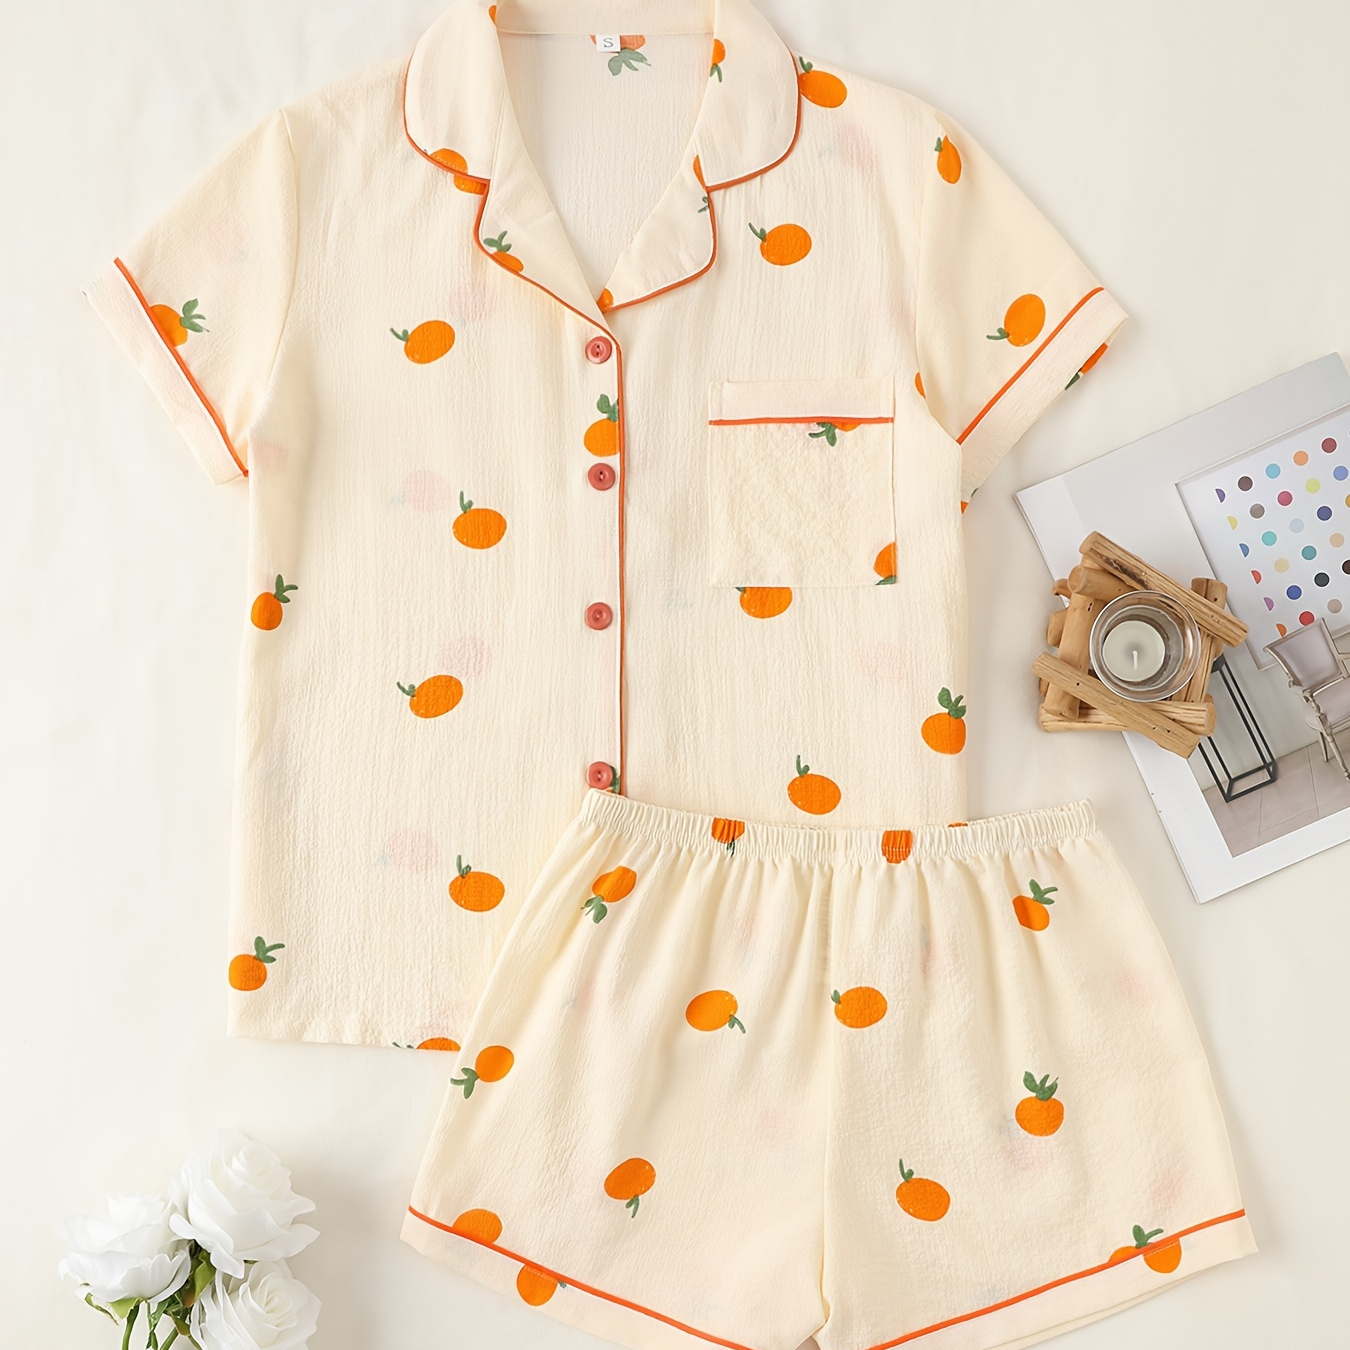 

Women's Orange Print Textured Sweet Pajama Set, Short Sleeve Buttons Lapel Top & Shorts, Comfortable Relaxed Fit